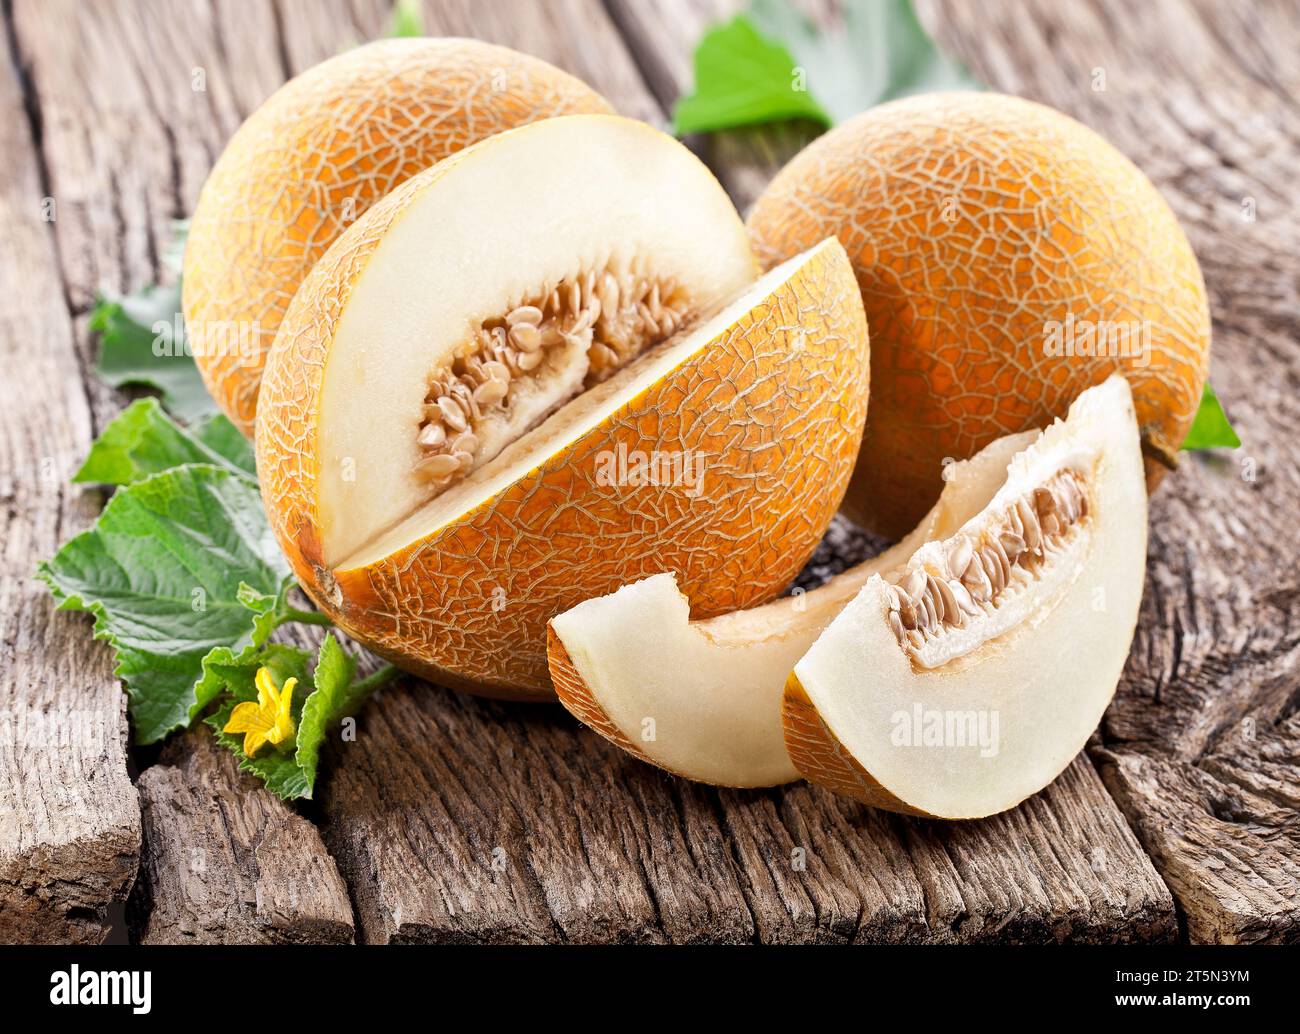 Cantaloupe melon with leaf and melon slice on old wooden table. Stock Photo